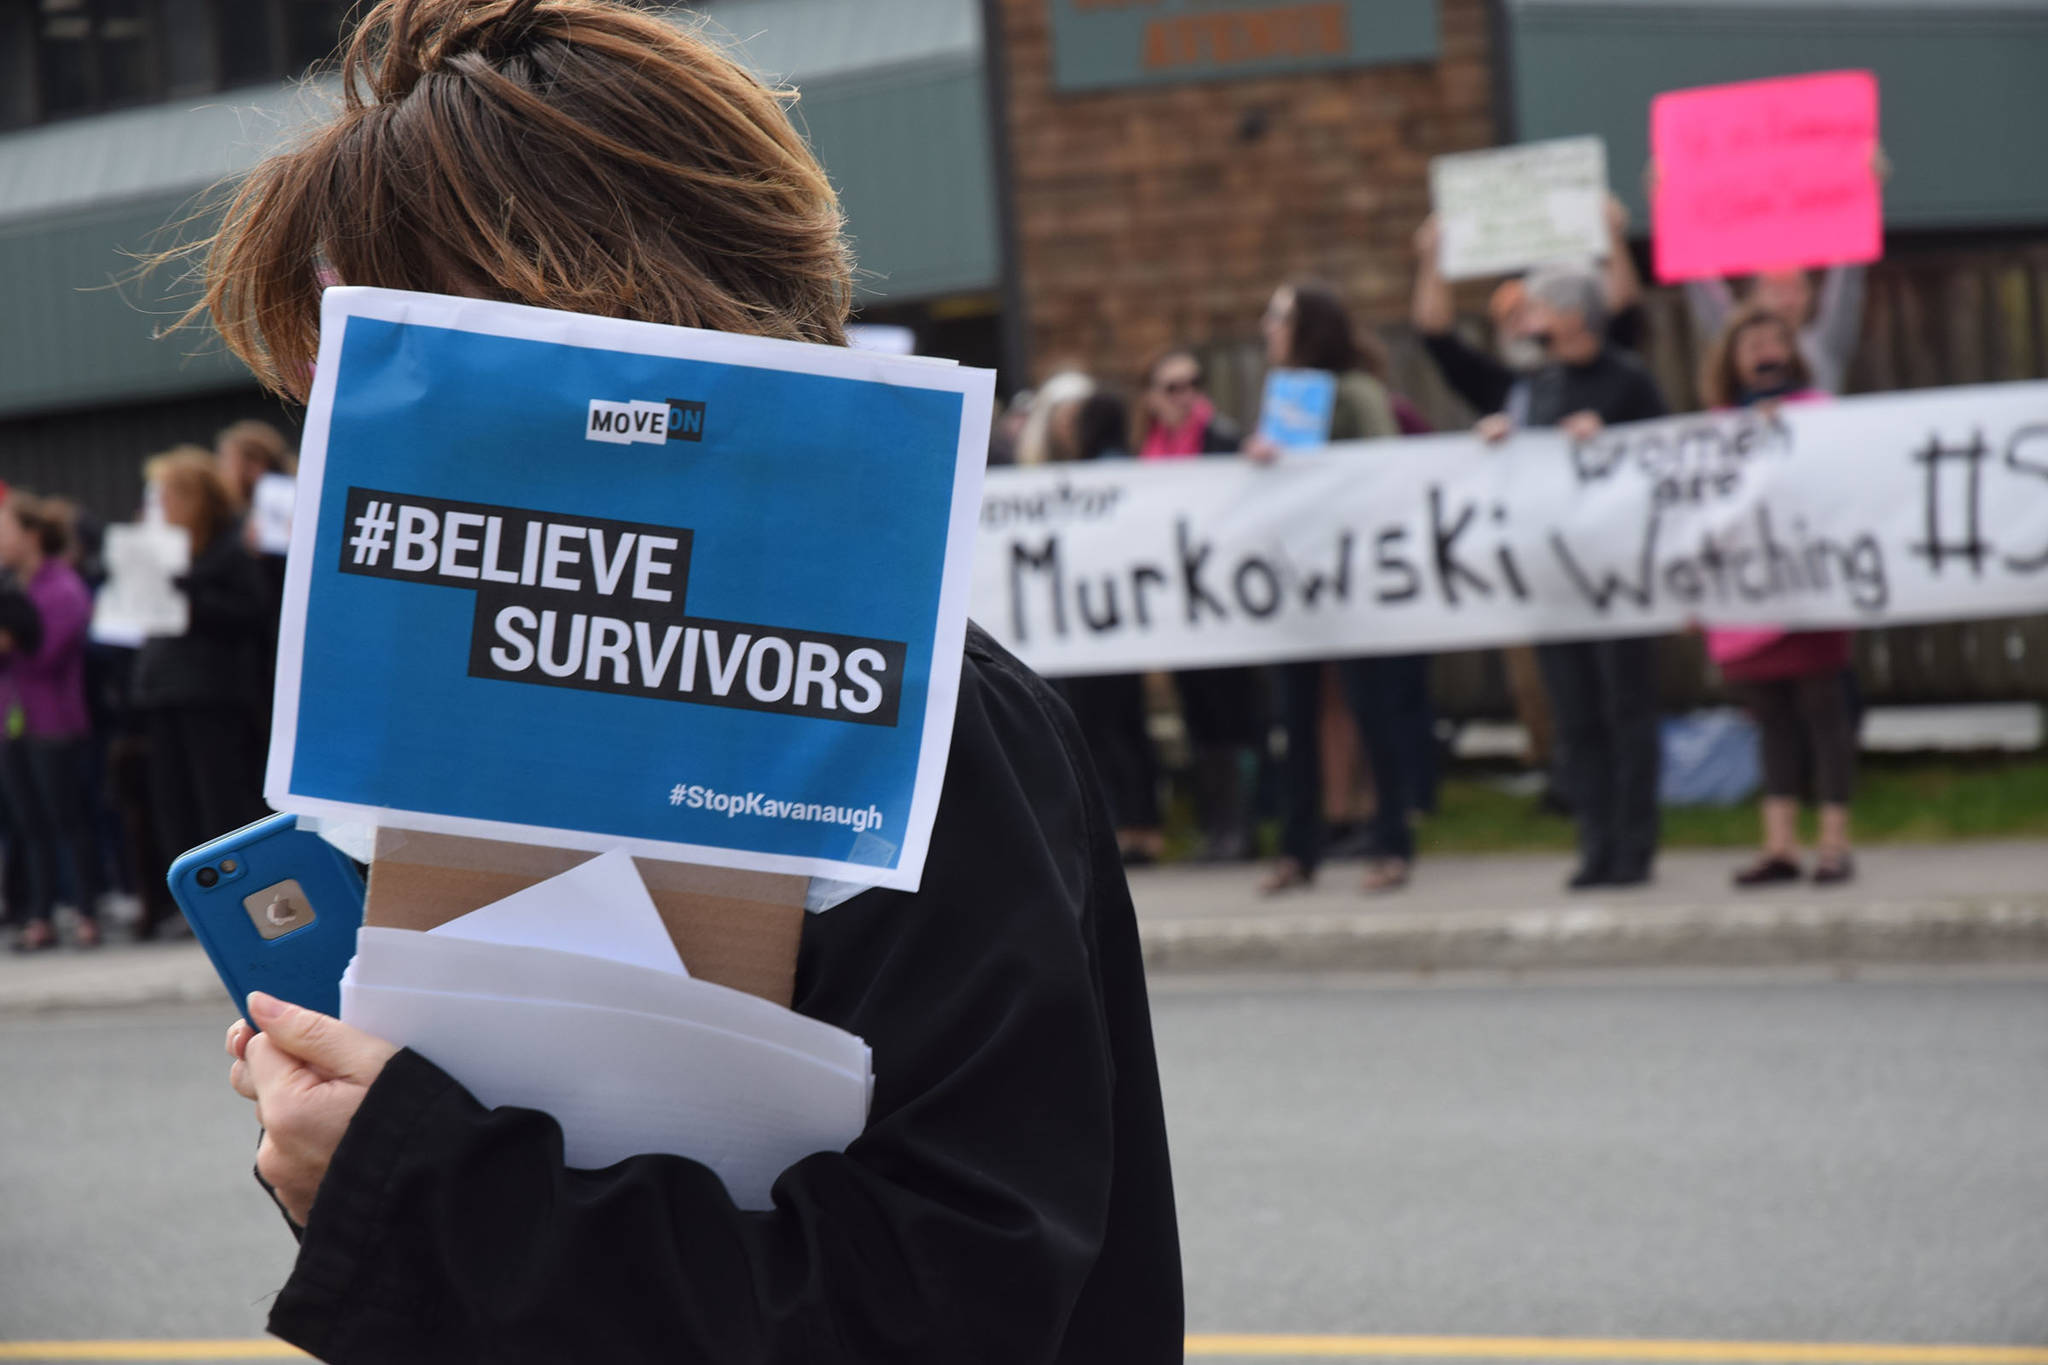 Protestors rallied Friday at the Juneau office of U.S. Sen. Lisa Murkowski, who will soon vote on the nomination of Judge Brett Kavanaugh to the U.S. Supreme Court. The group of about 130 urged Murkowski to vote against the nomination of Kavenaugh, who is accused of sexual assault. (Kevin Gullufsen | Juneau Empire)